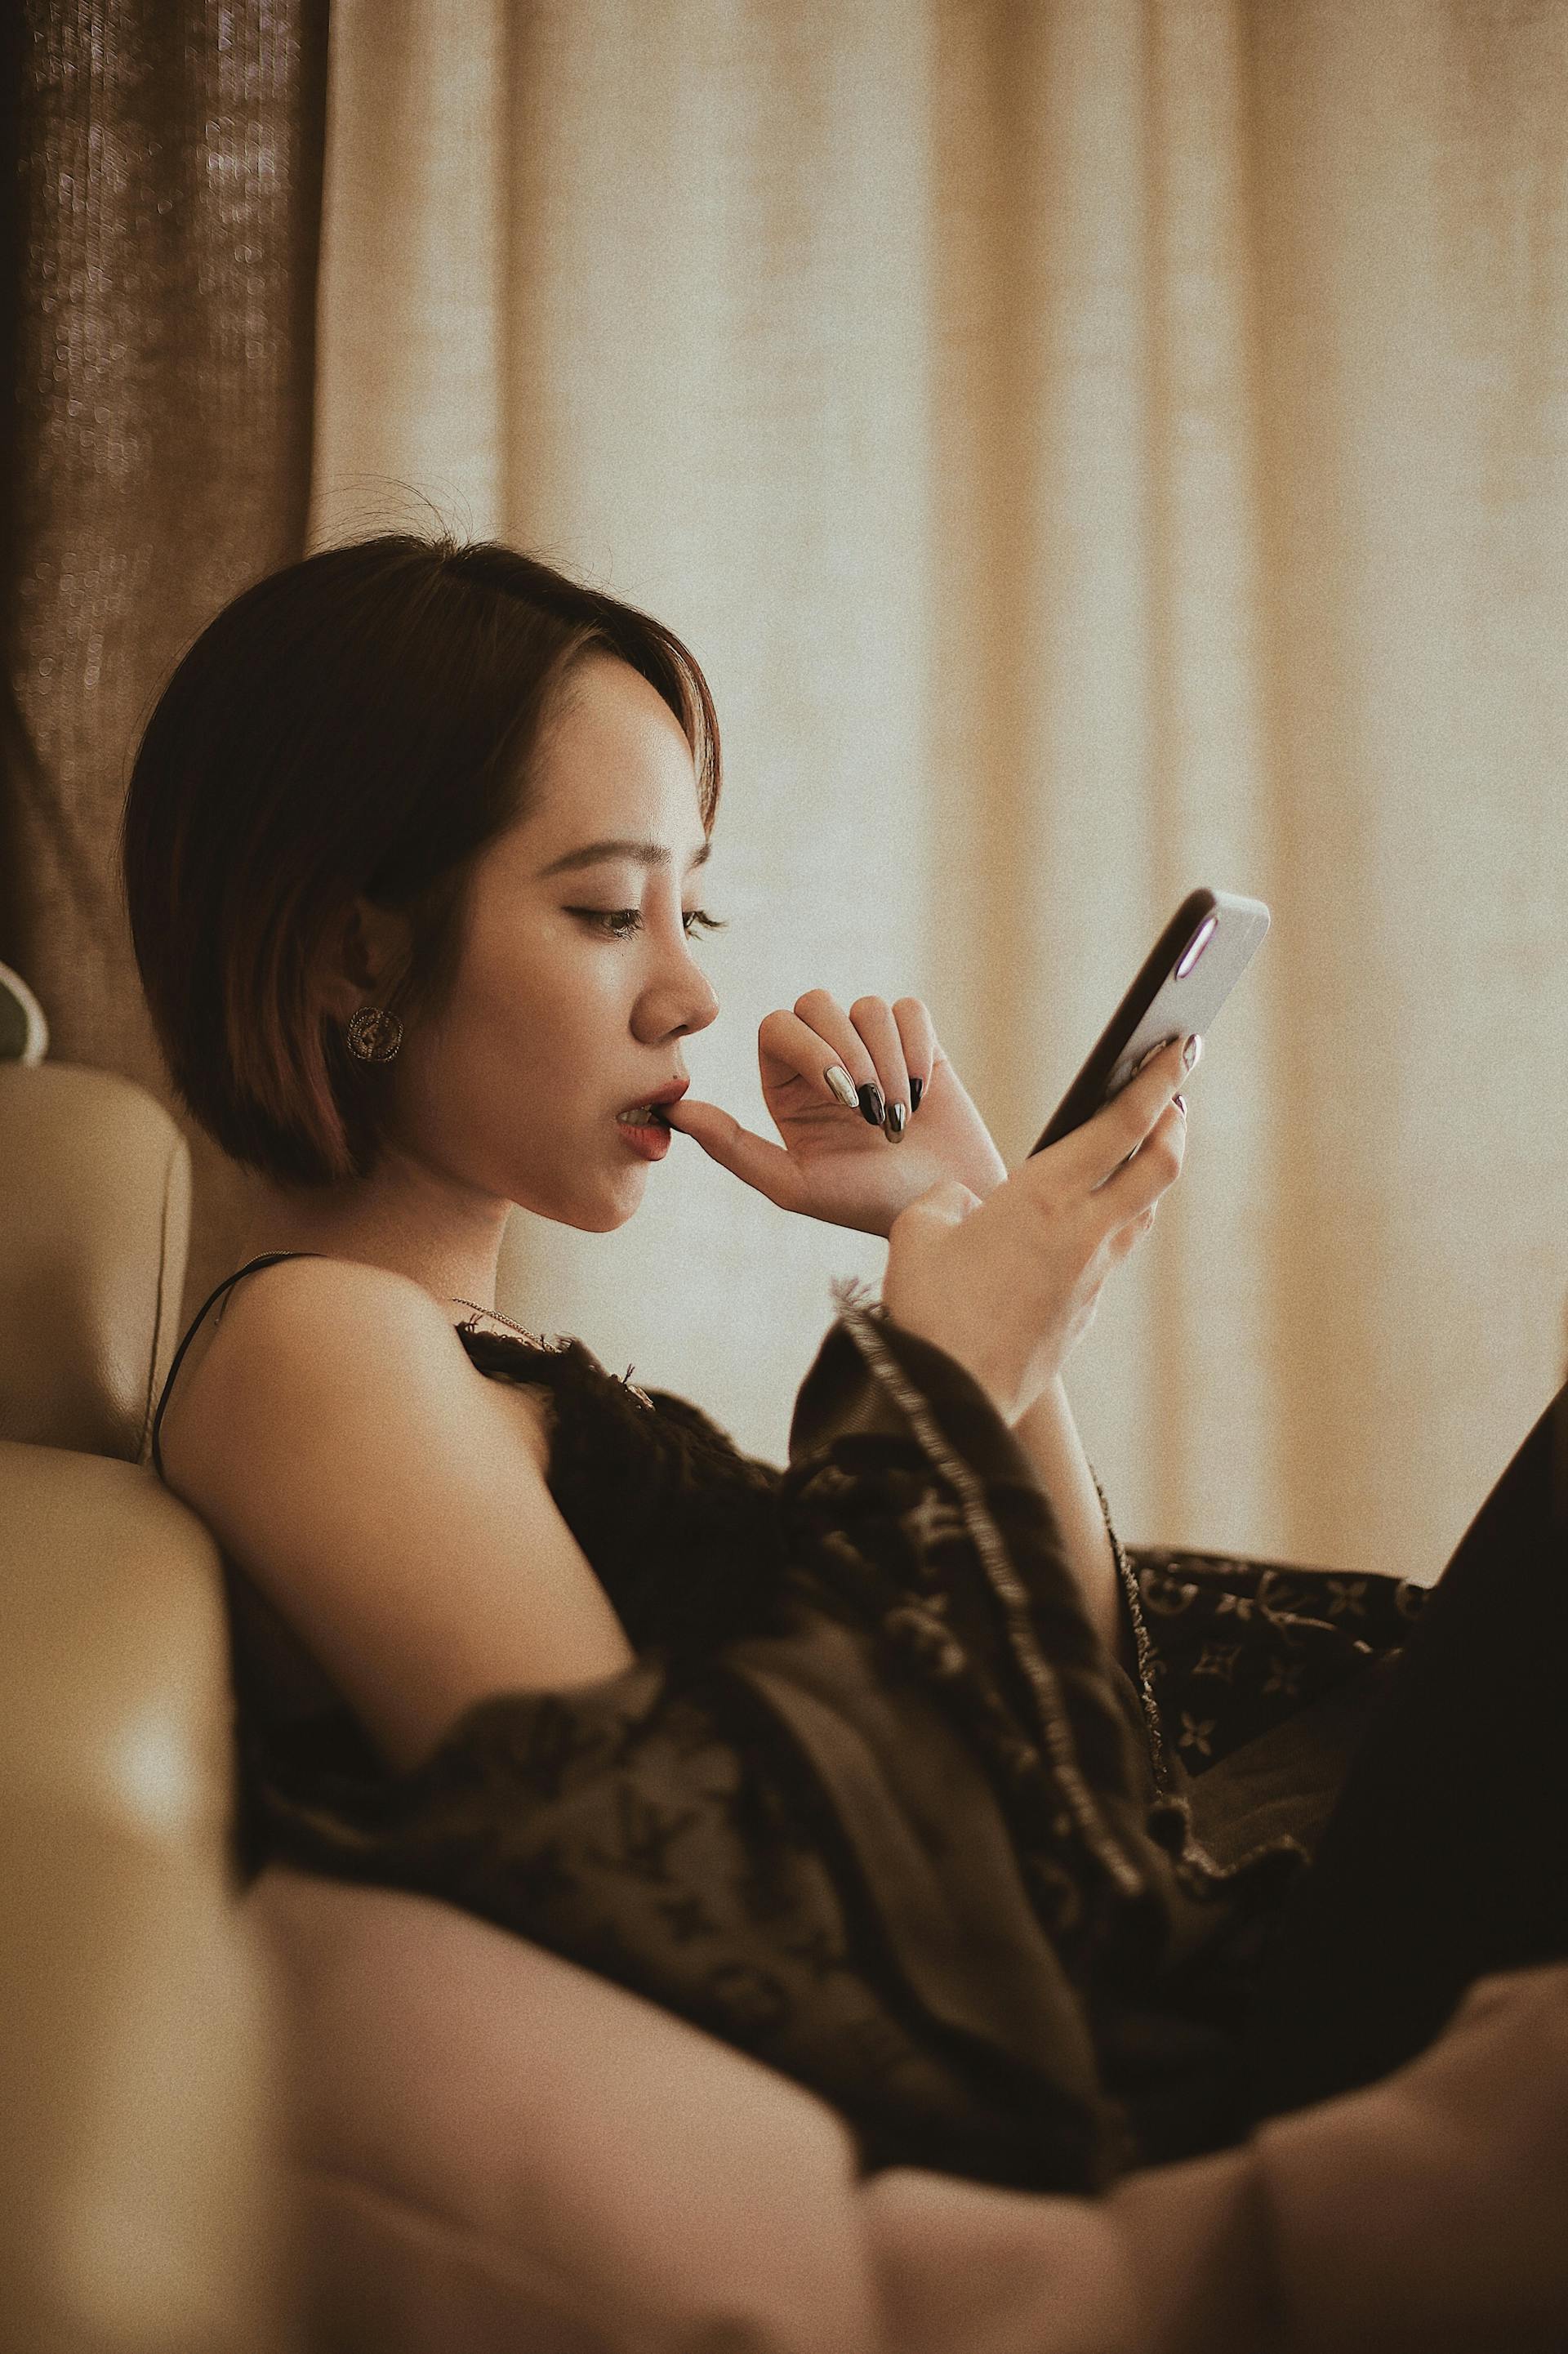 A woman using her phone | Source: Pexels